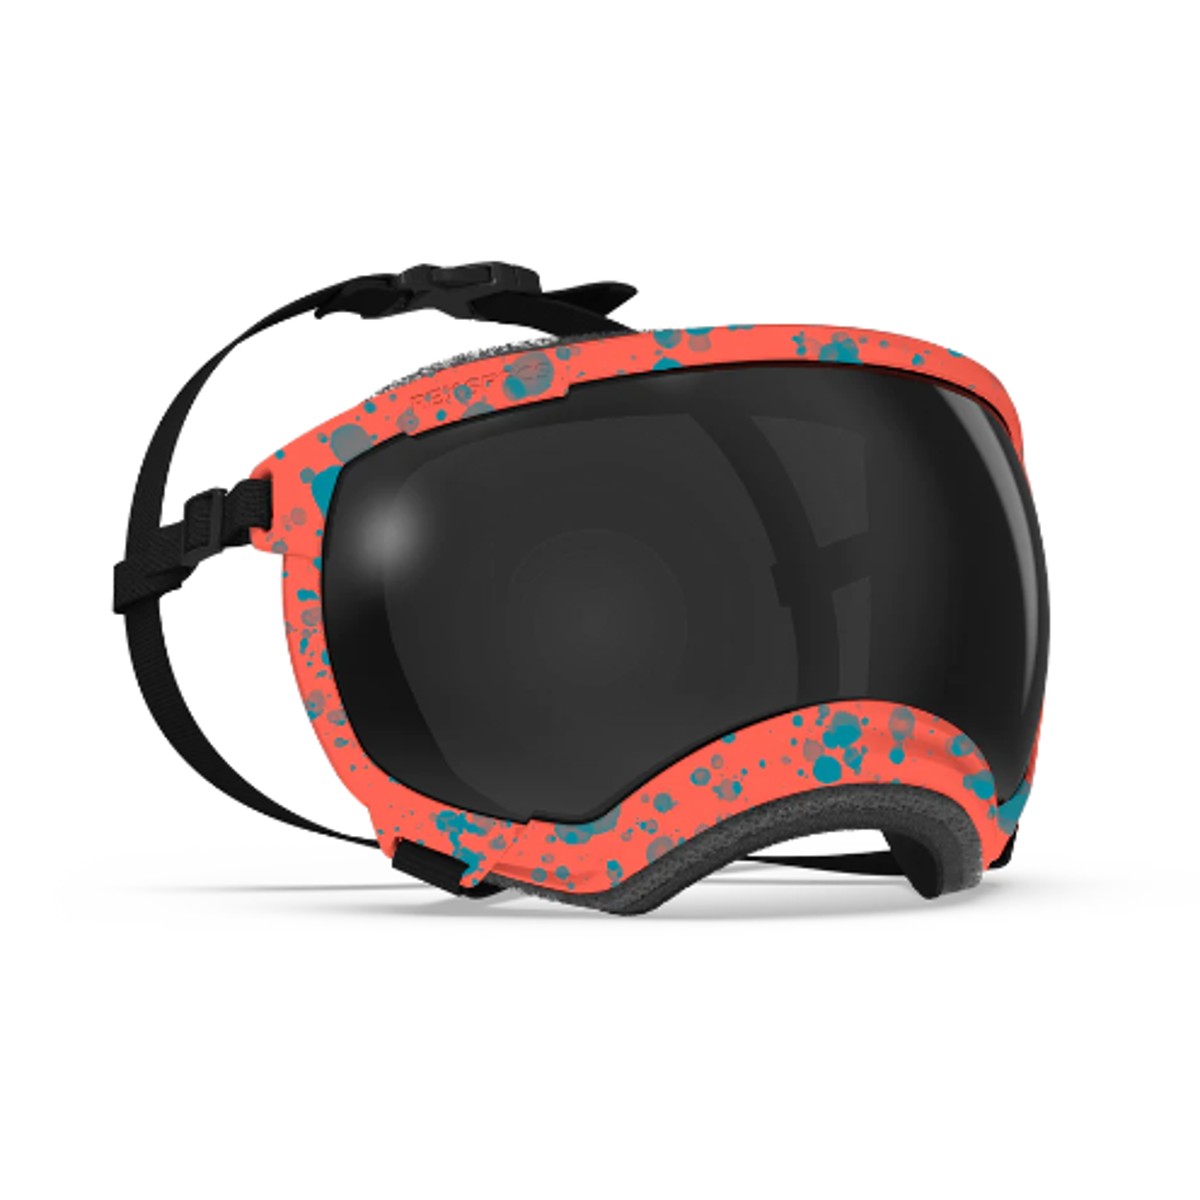 Rex Specs V2 Dog Goggles - Limited Edition Coral Reef